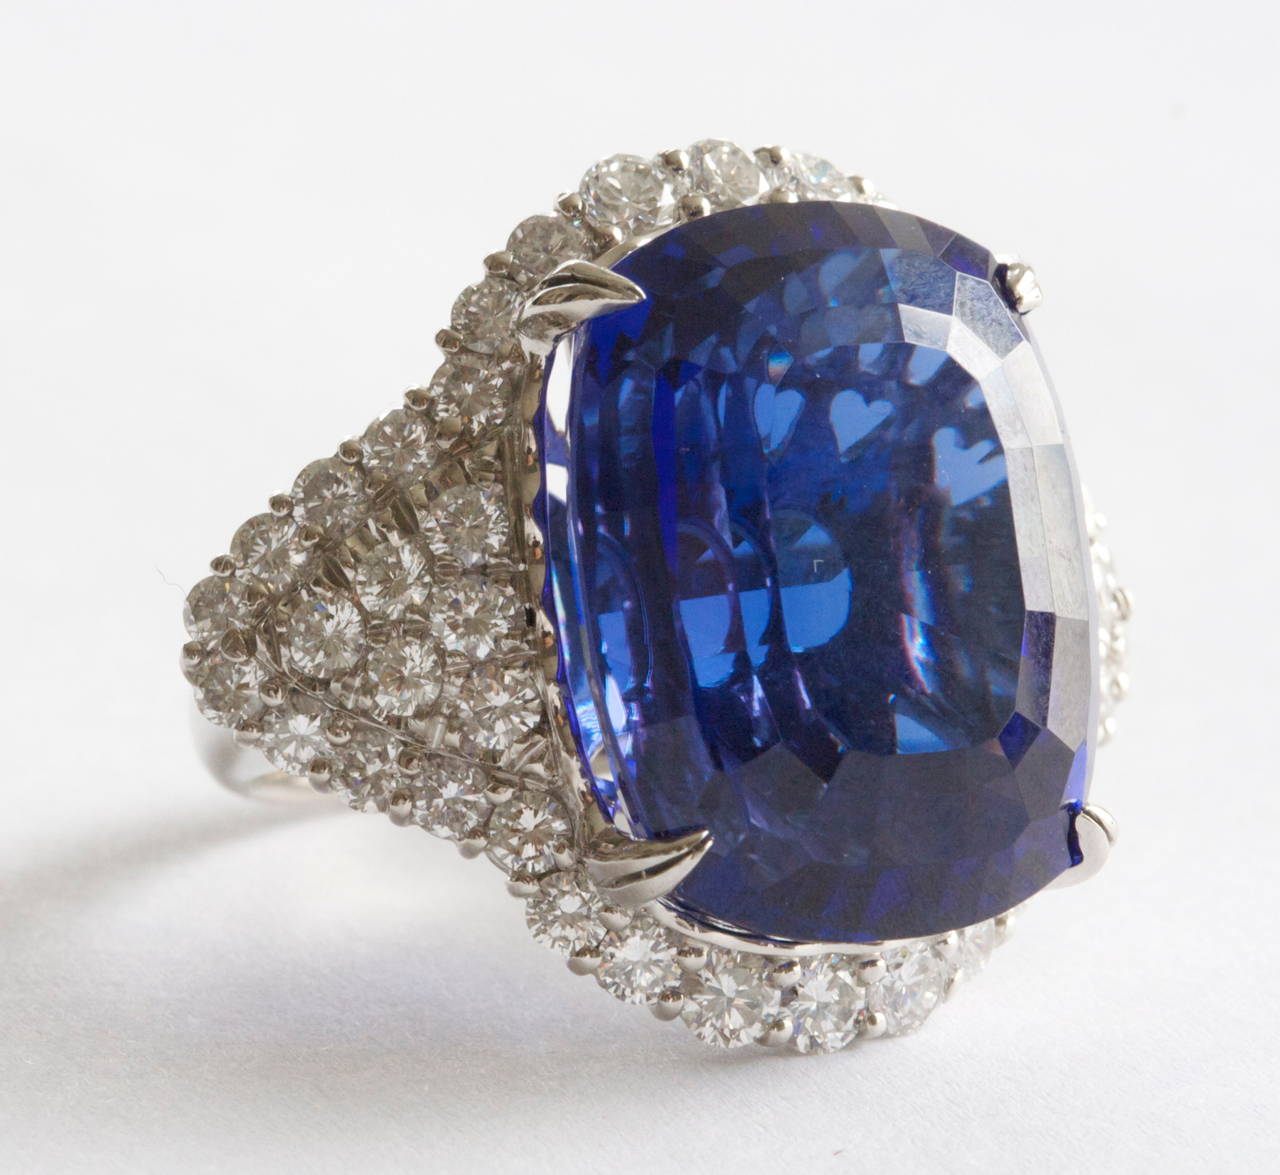 A fabulously designed diamond platinum ring featuring a rare gem quality 41.72  carat natural tanzanite. A tanzanite of this size and quality displaying this dark and vivid blue color is rare. With GIA certificate.

Legend has it, the land was set